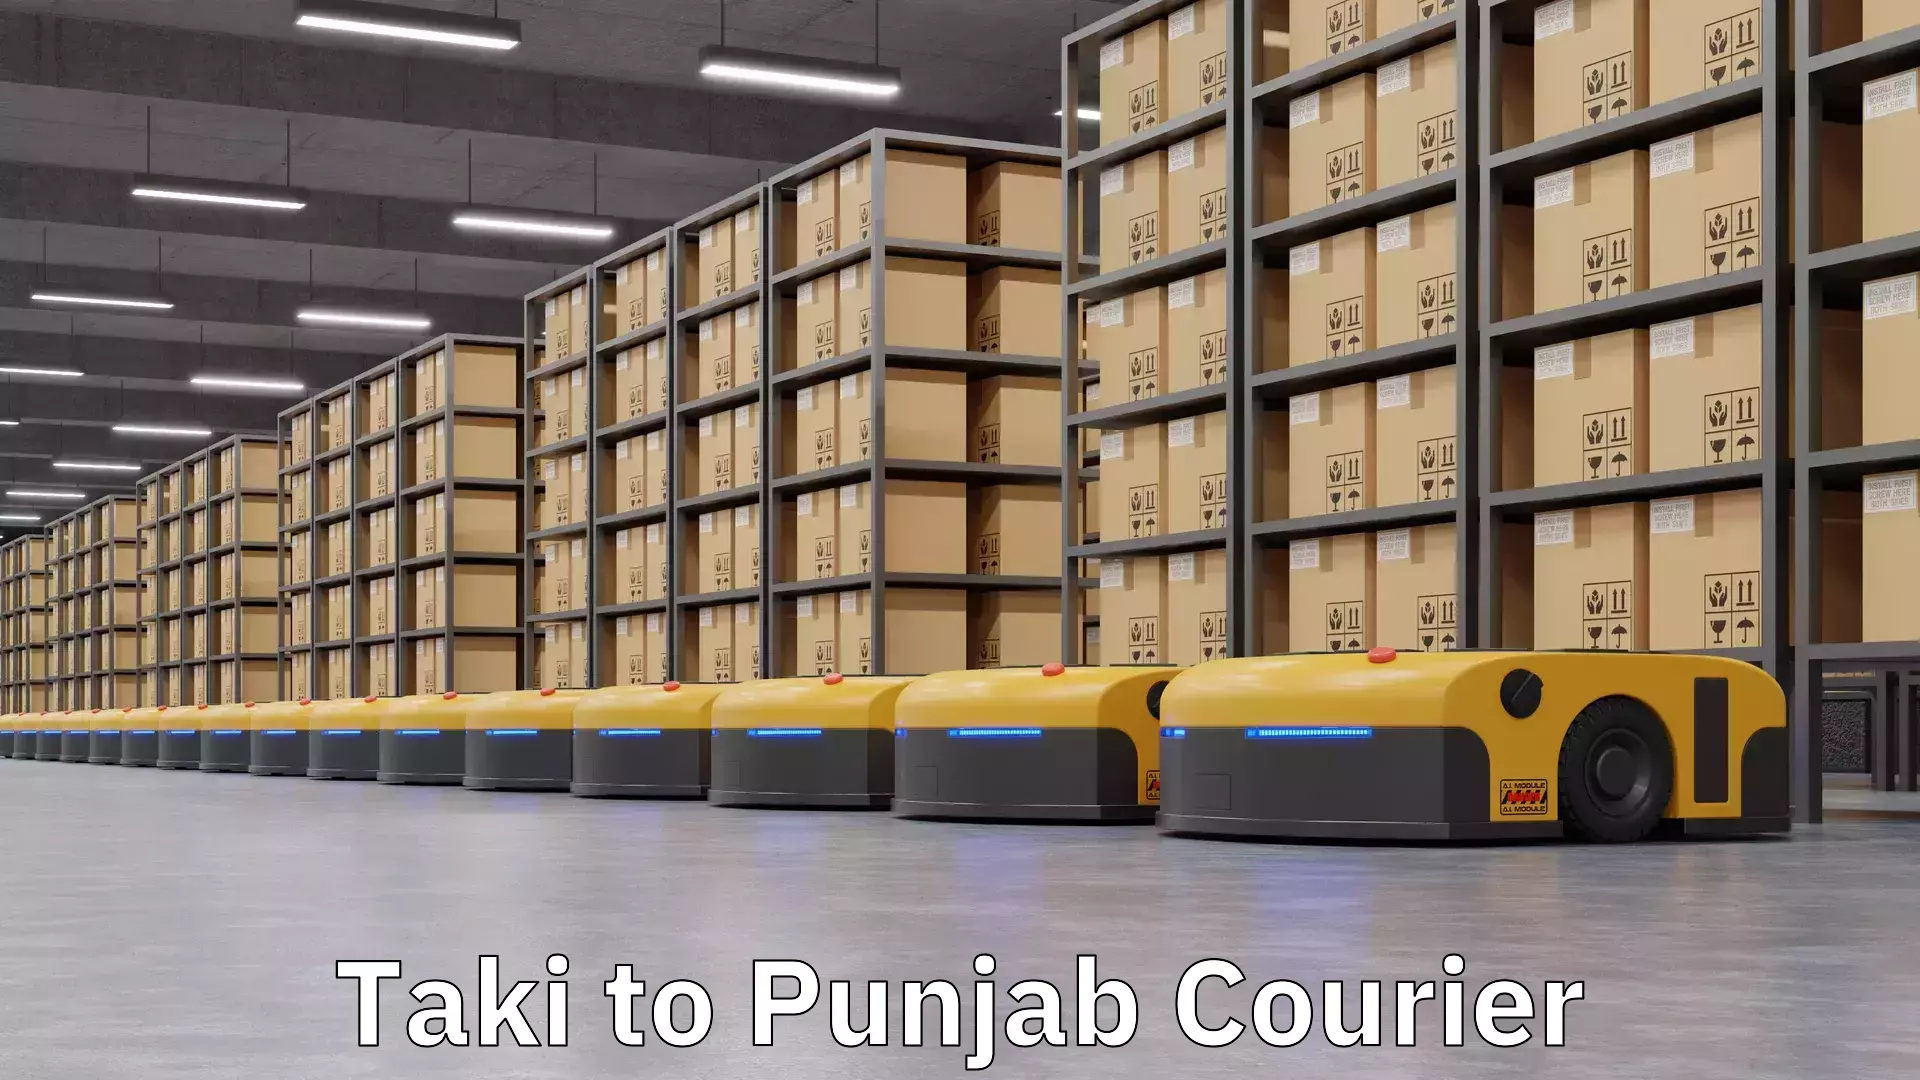 Fast-track shipping solutions Taki to Punjab